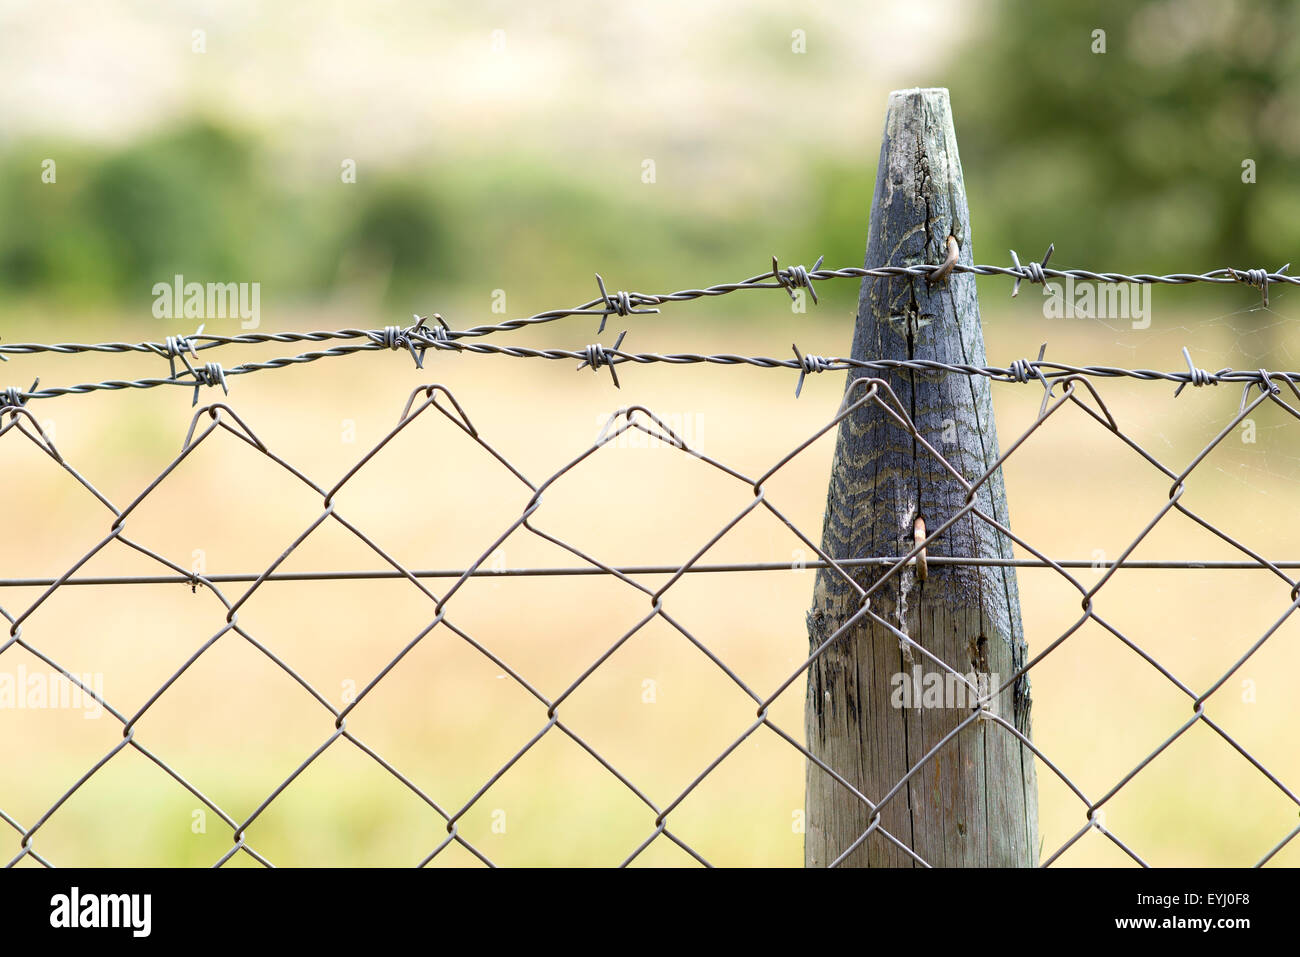 A Close Up of a Wooden Fence with Barbed Wire Stock Photo